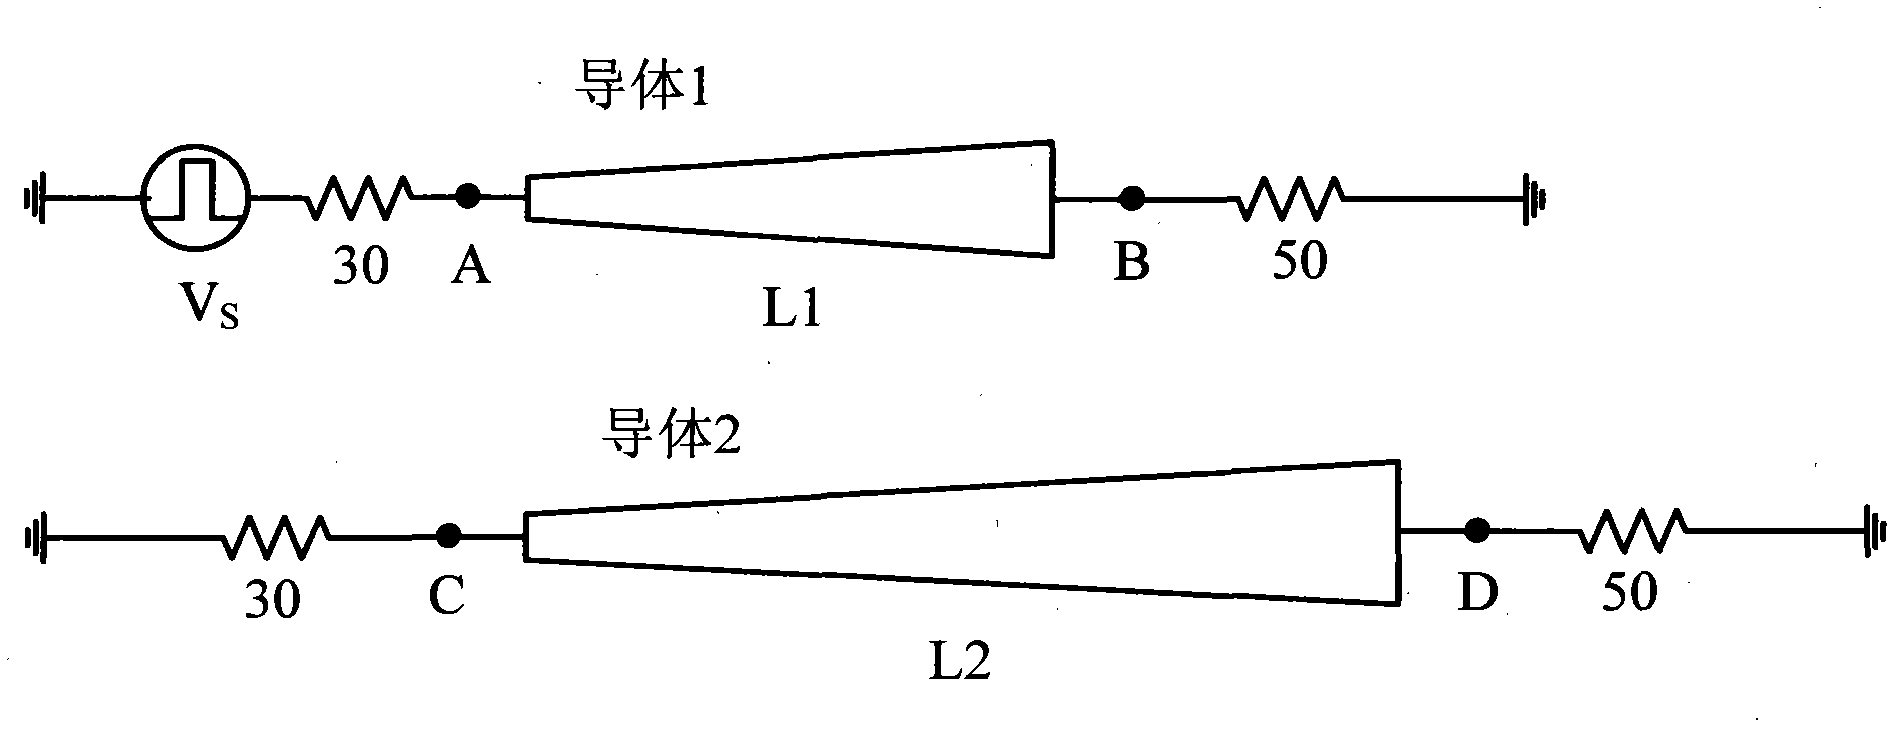 Time domain analysis method for transient response of lossy nonuniform multi-conductor transmission lines